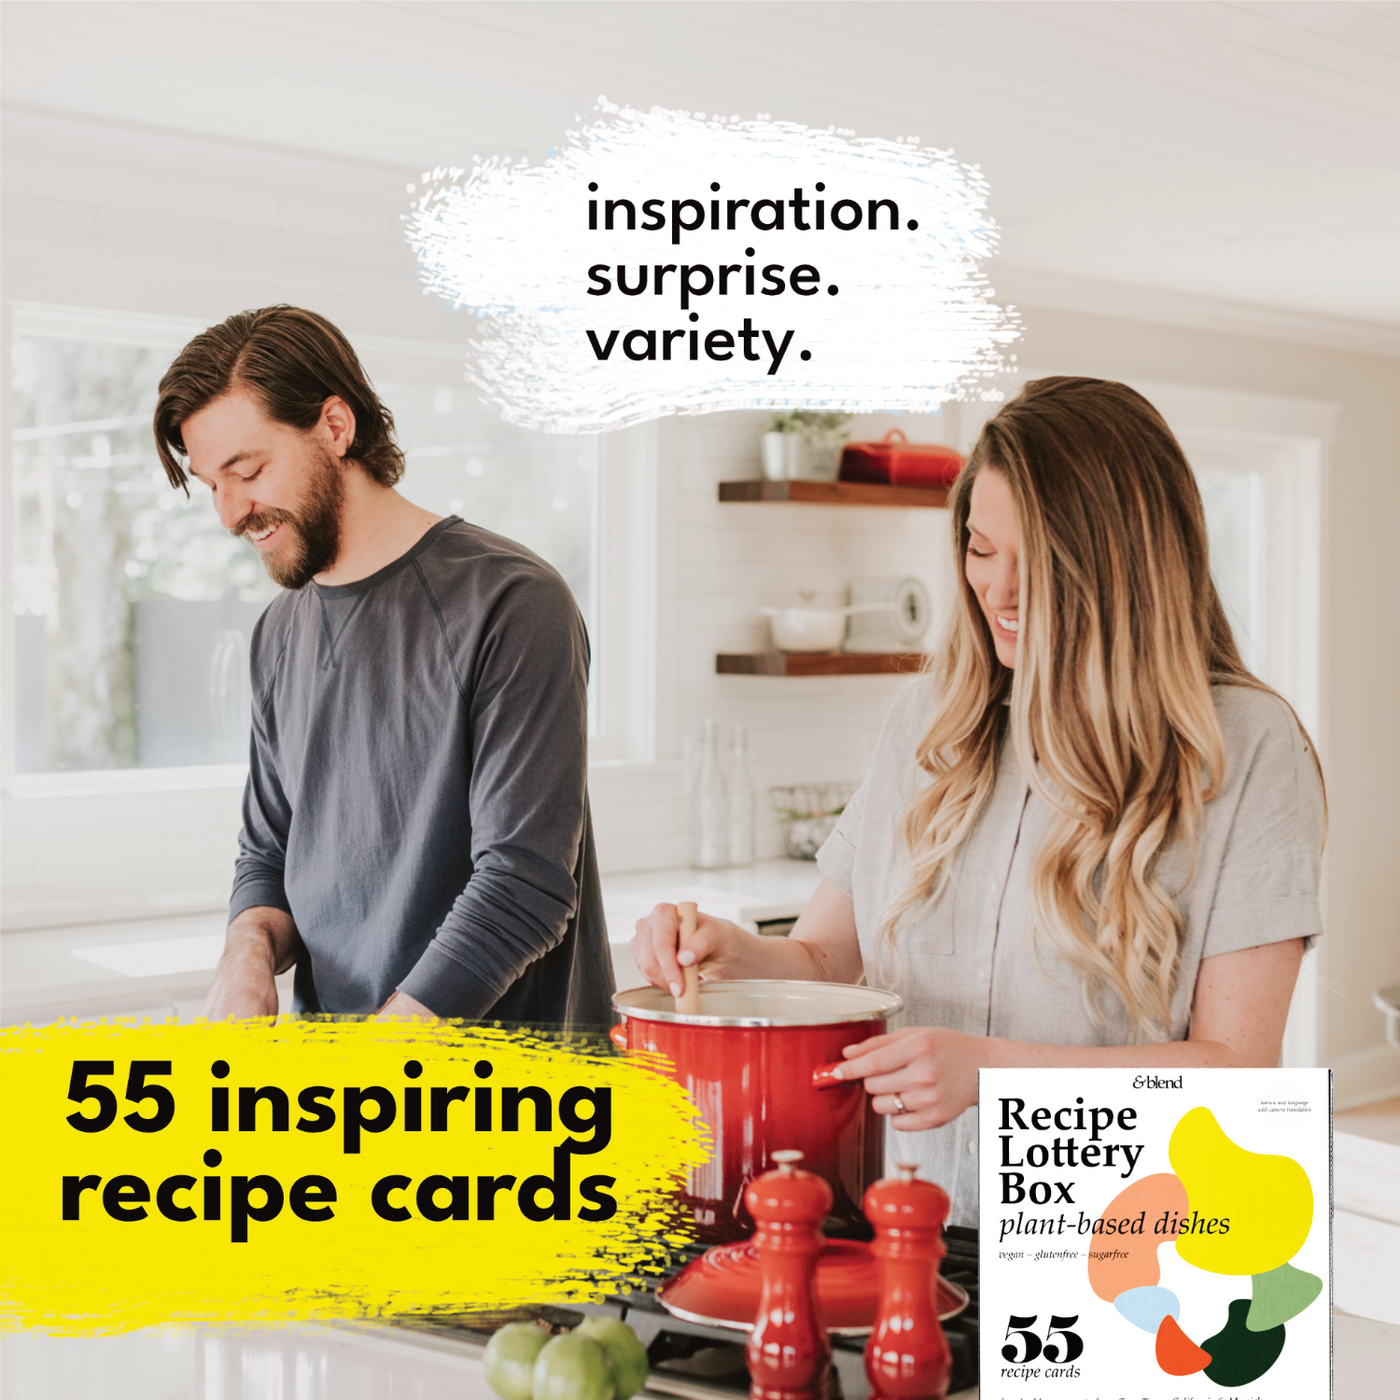 Recipe Lottery Box with 55 inspiring recipe cards